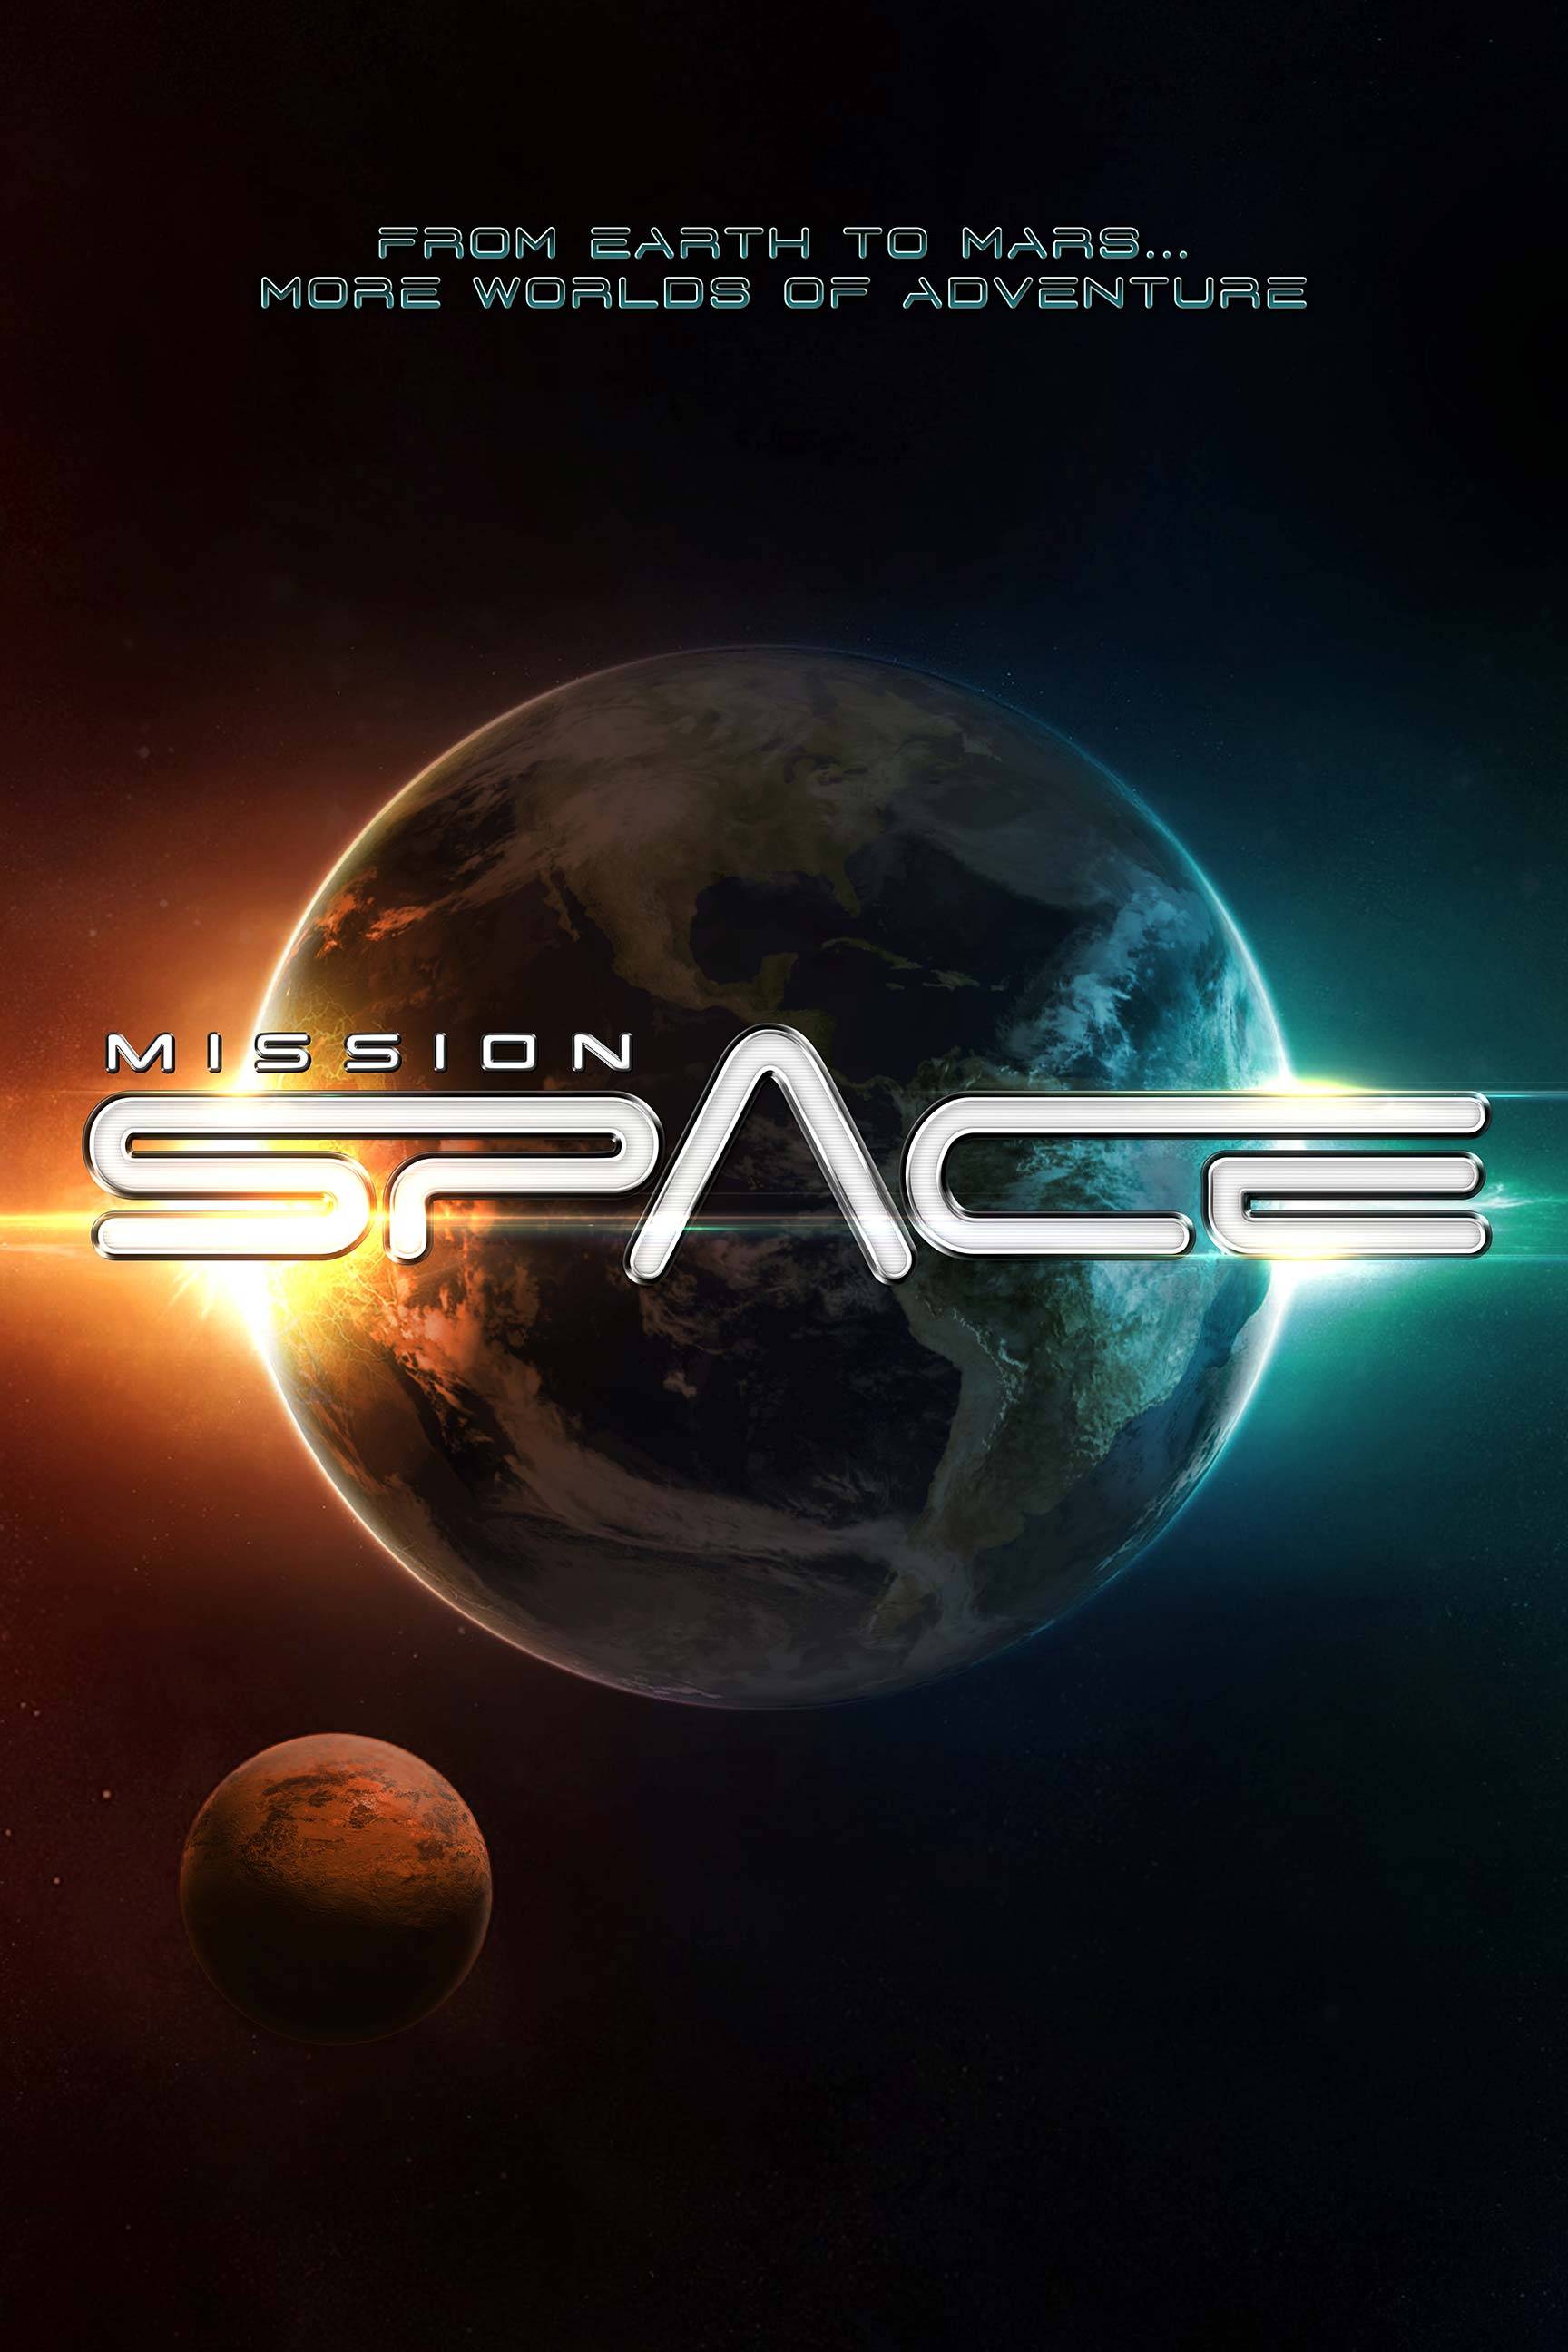 Mission: SPACE reopens August 13